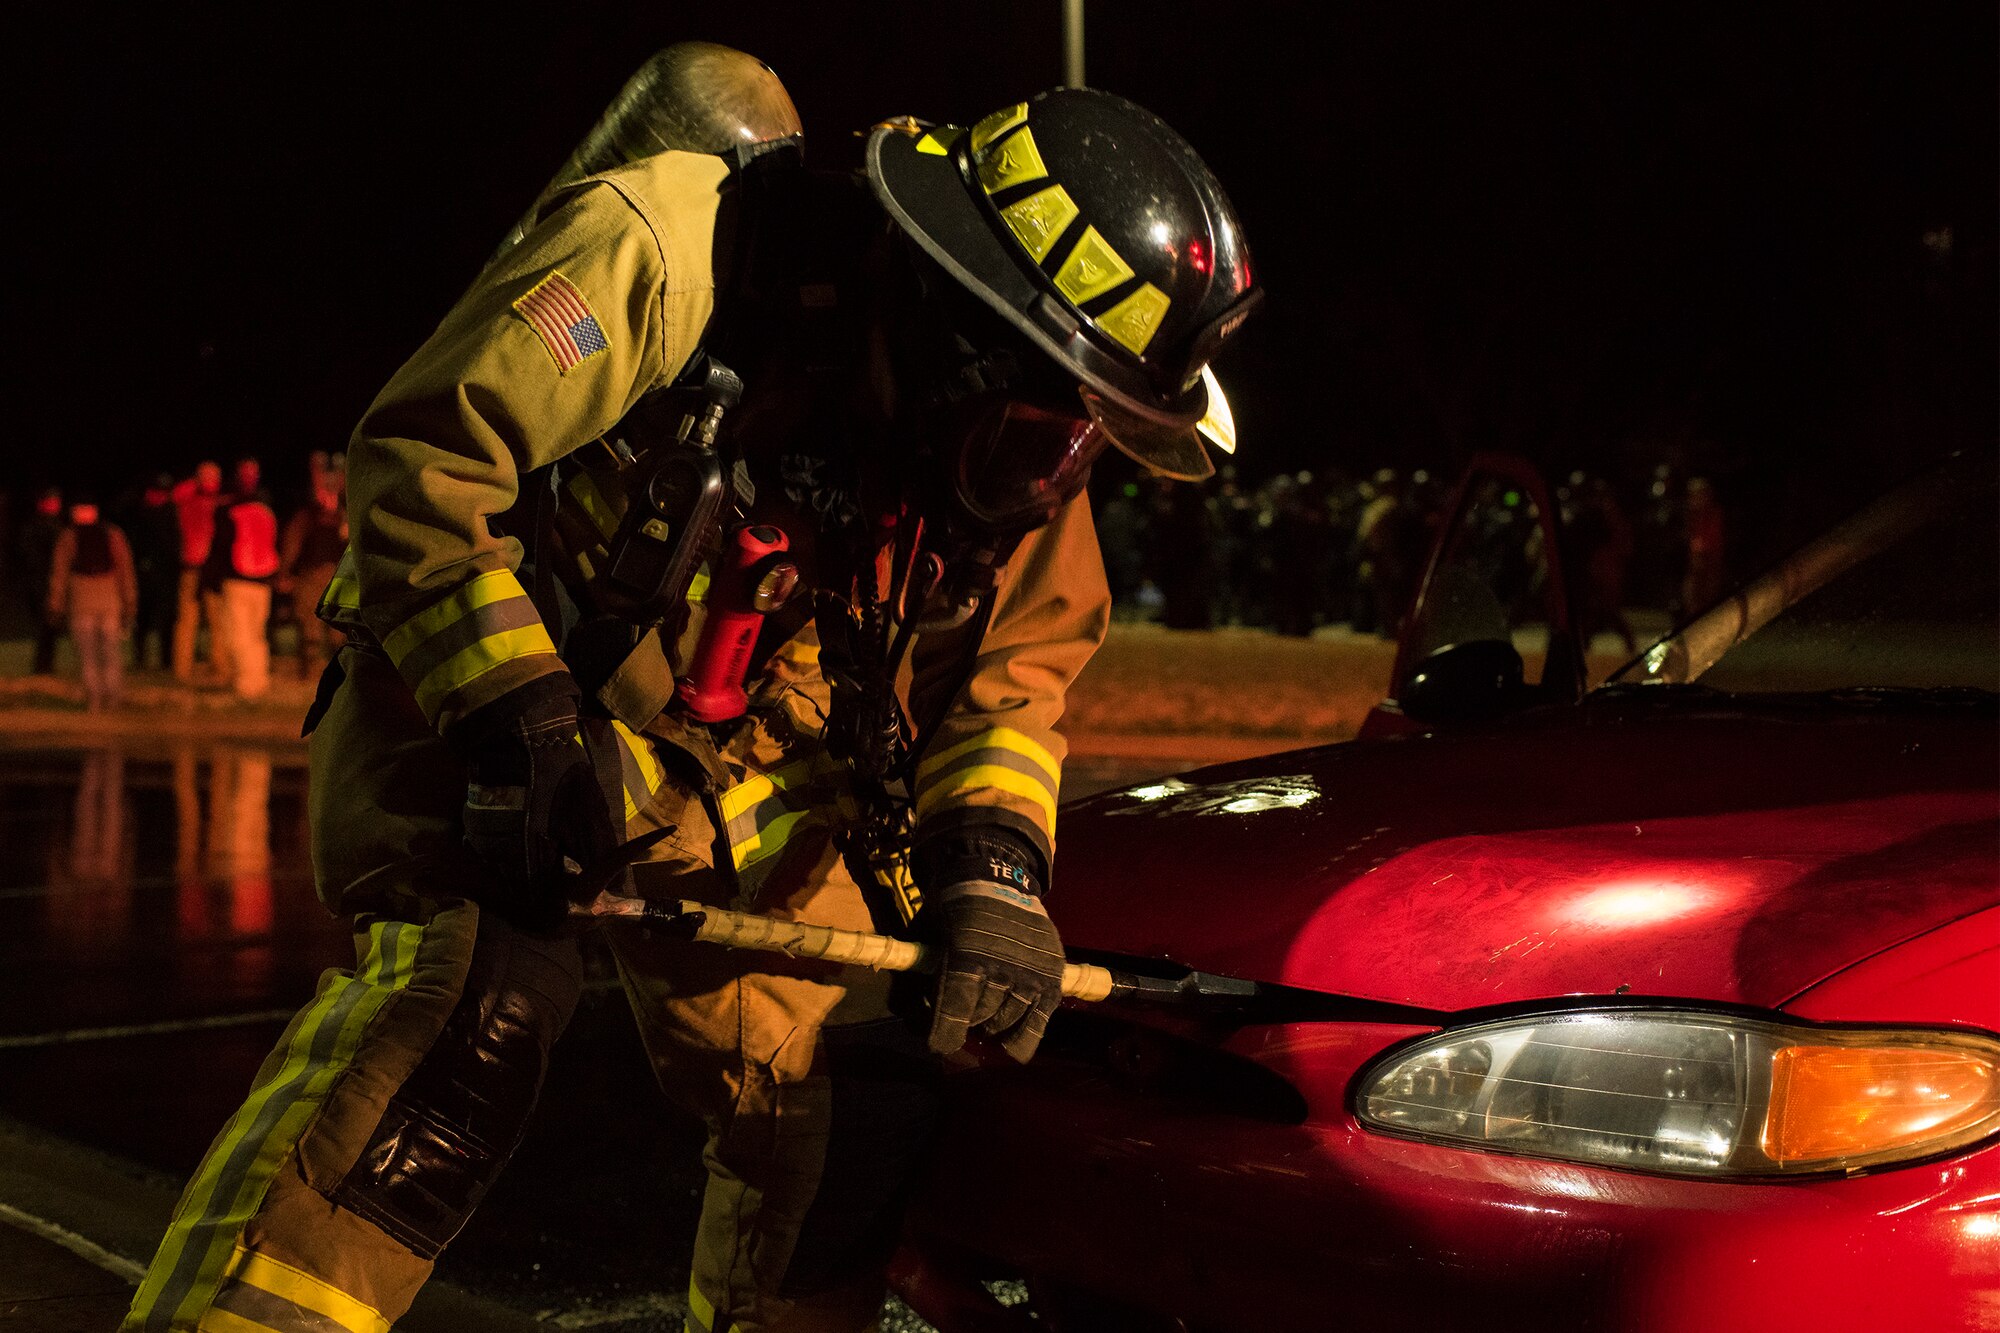 A firefighter assigned to Little Rock Air Force Base, Arkansas, practices dousing a car fire during Operation Phalax held March 30-31, 2019.  The operation is a joint exercise hosted by the Arkansas National Guard for civil and military organizations to train their members in tactics and techniques used in responding to a civil disturbance. (U.S. Air National Guard photo by Staff Sgt. Matthew Matlock)